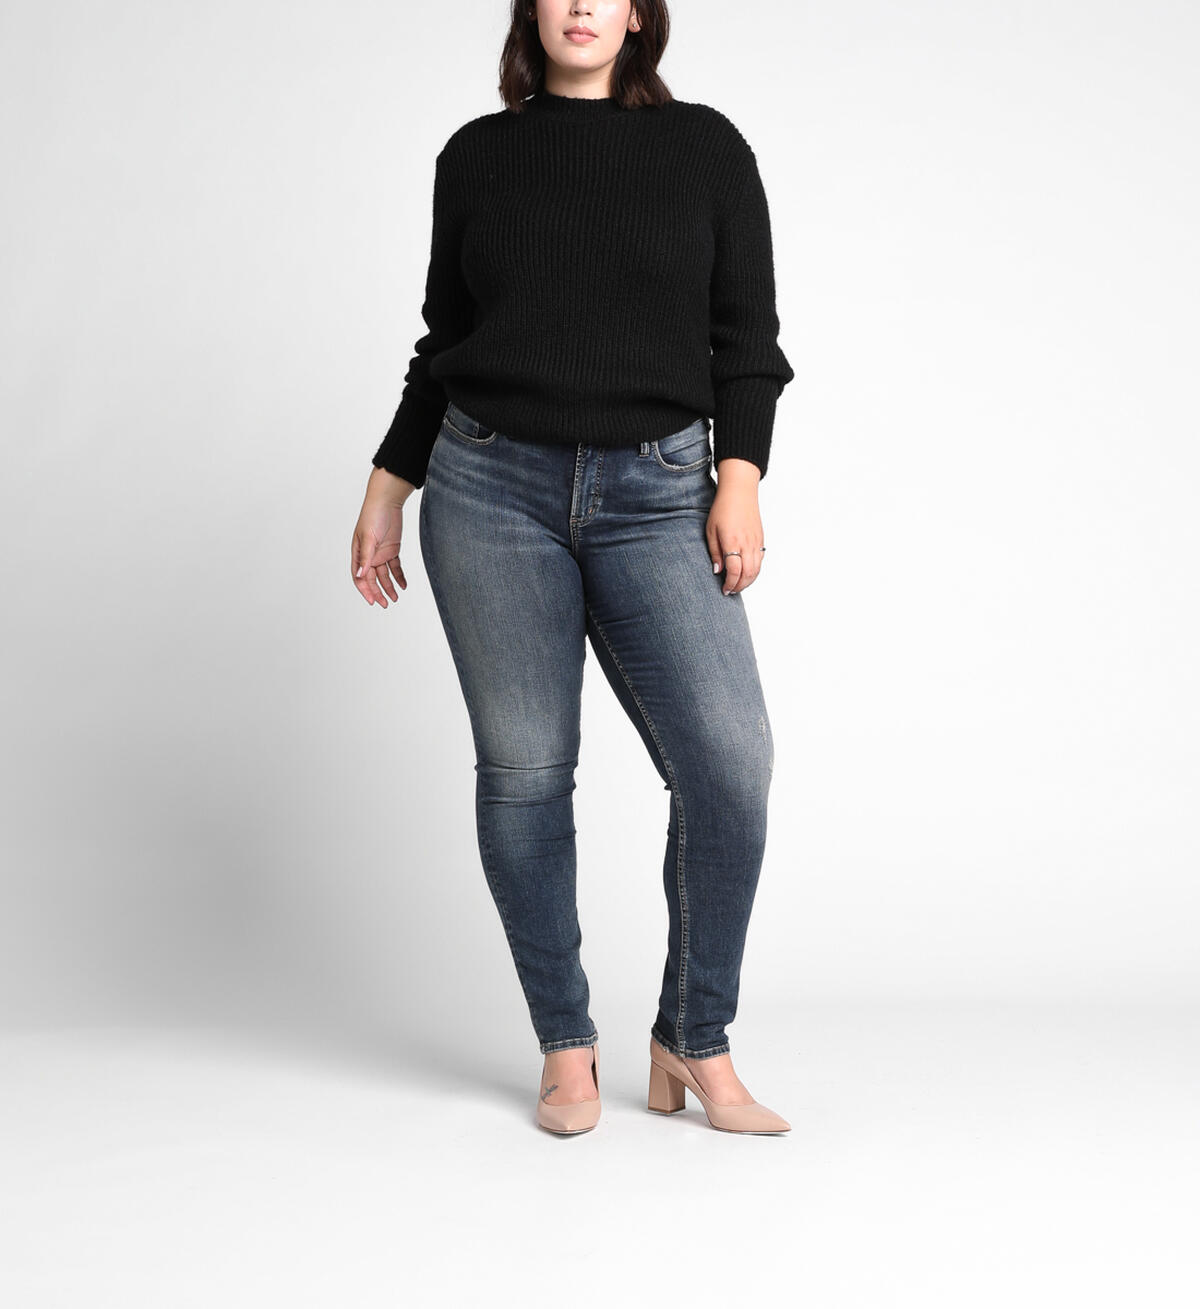 Avery High Rise Slim Leg Jeans Plus Size Final Sale, , hi-res image number 3